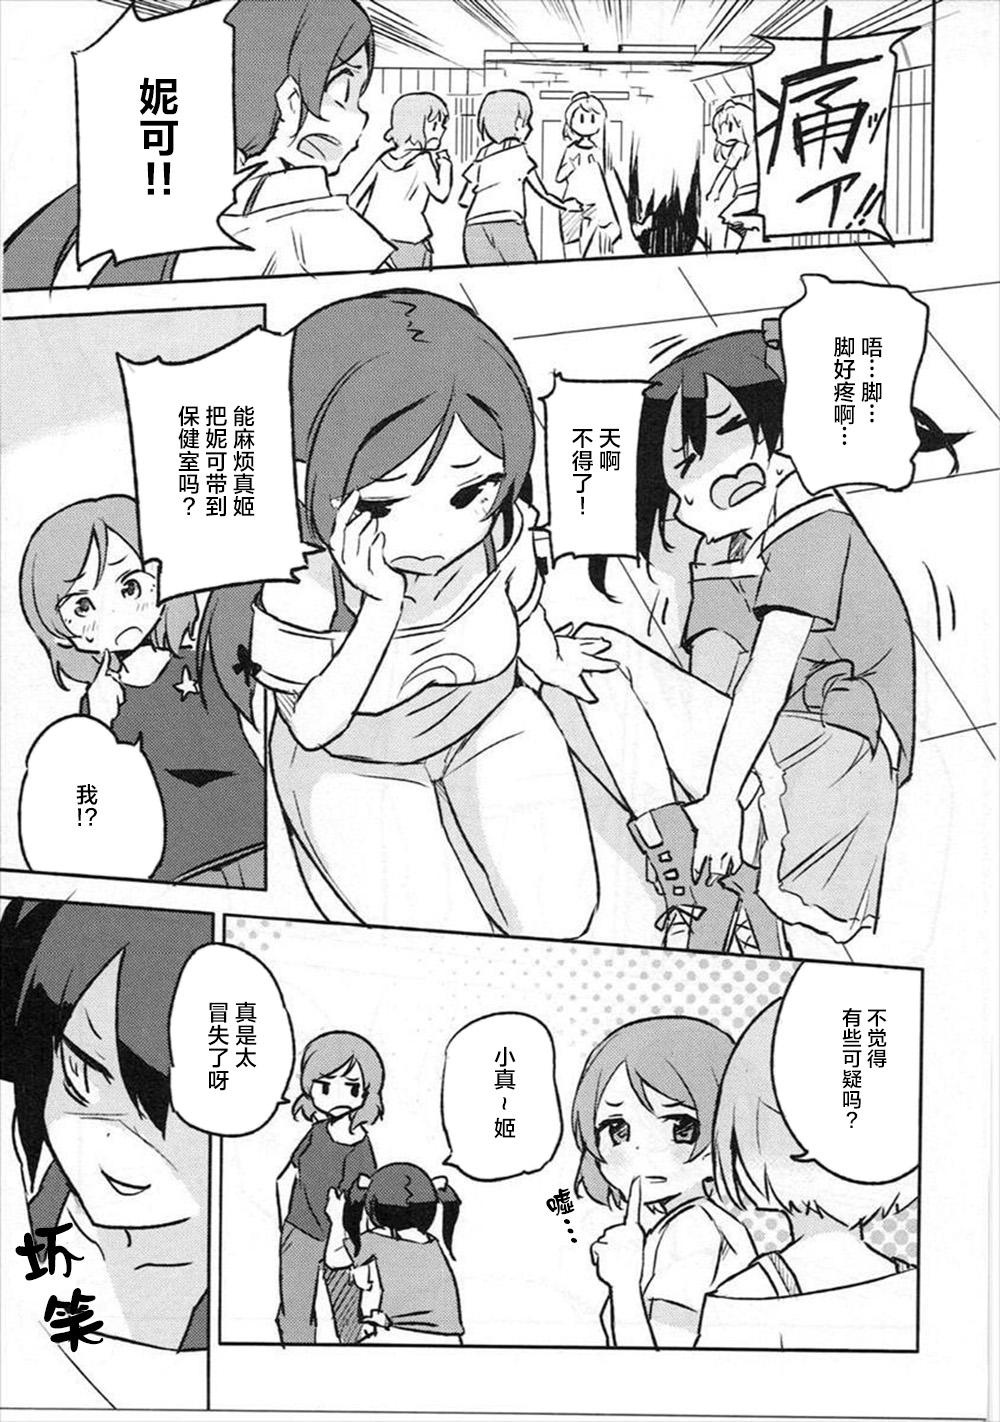 Hogtied Liberation!! - Love live Stepsiblings - Page 6